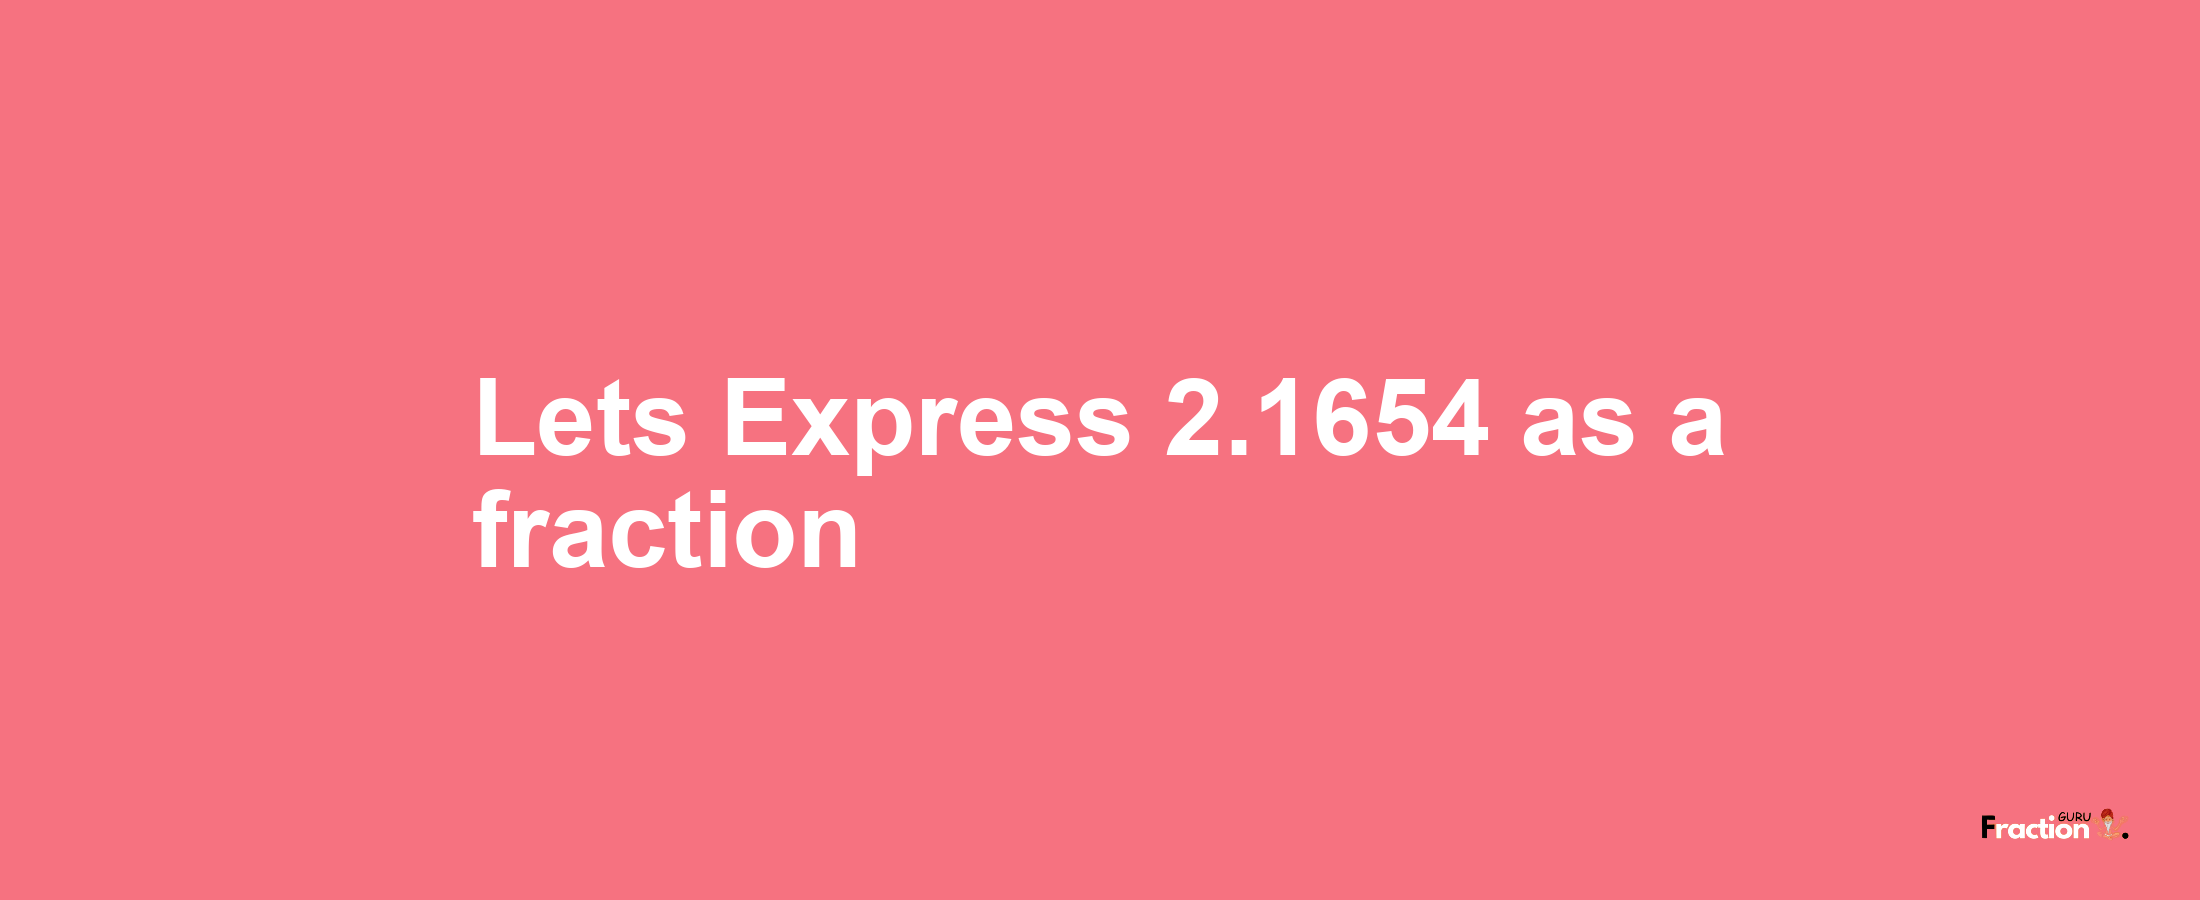 Lets Express 2.1654 as afraction